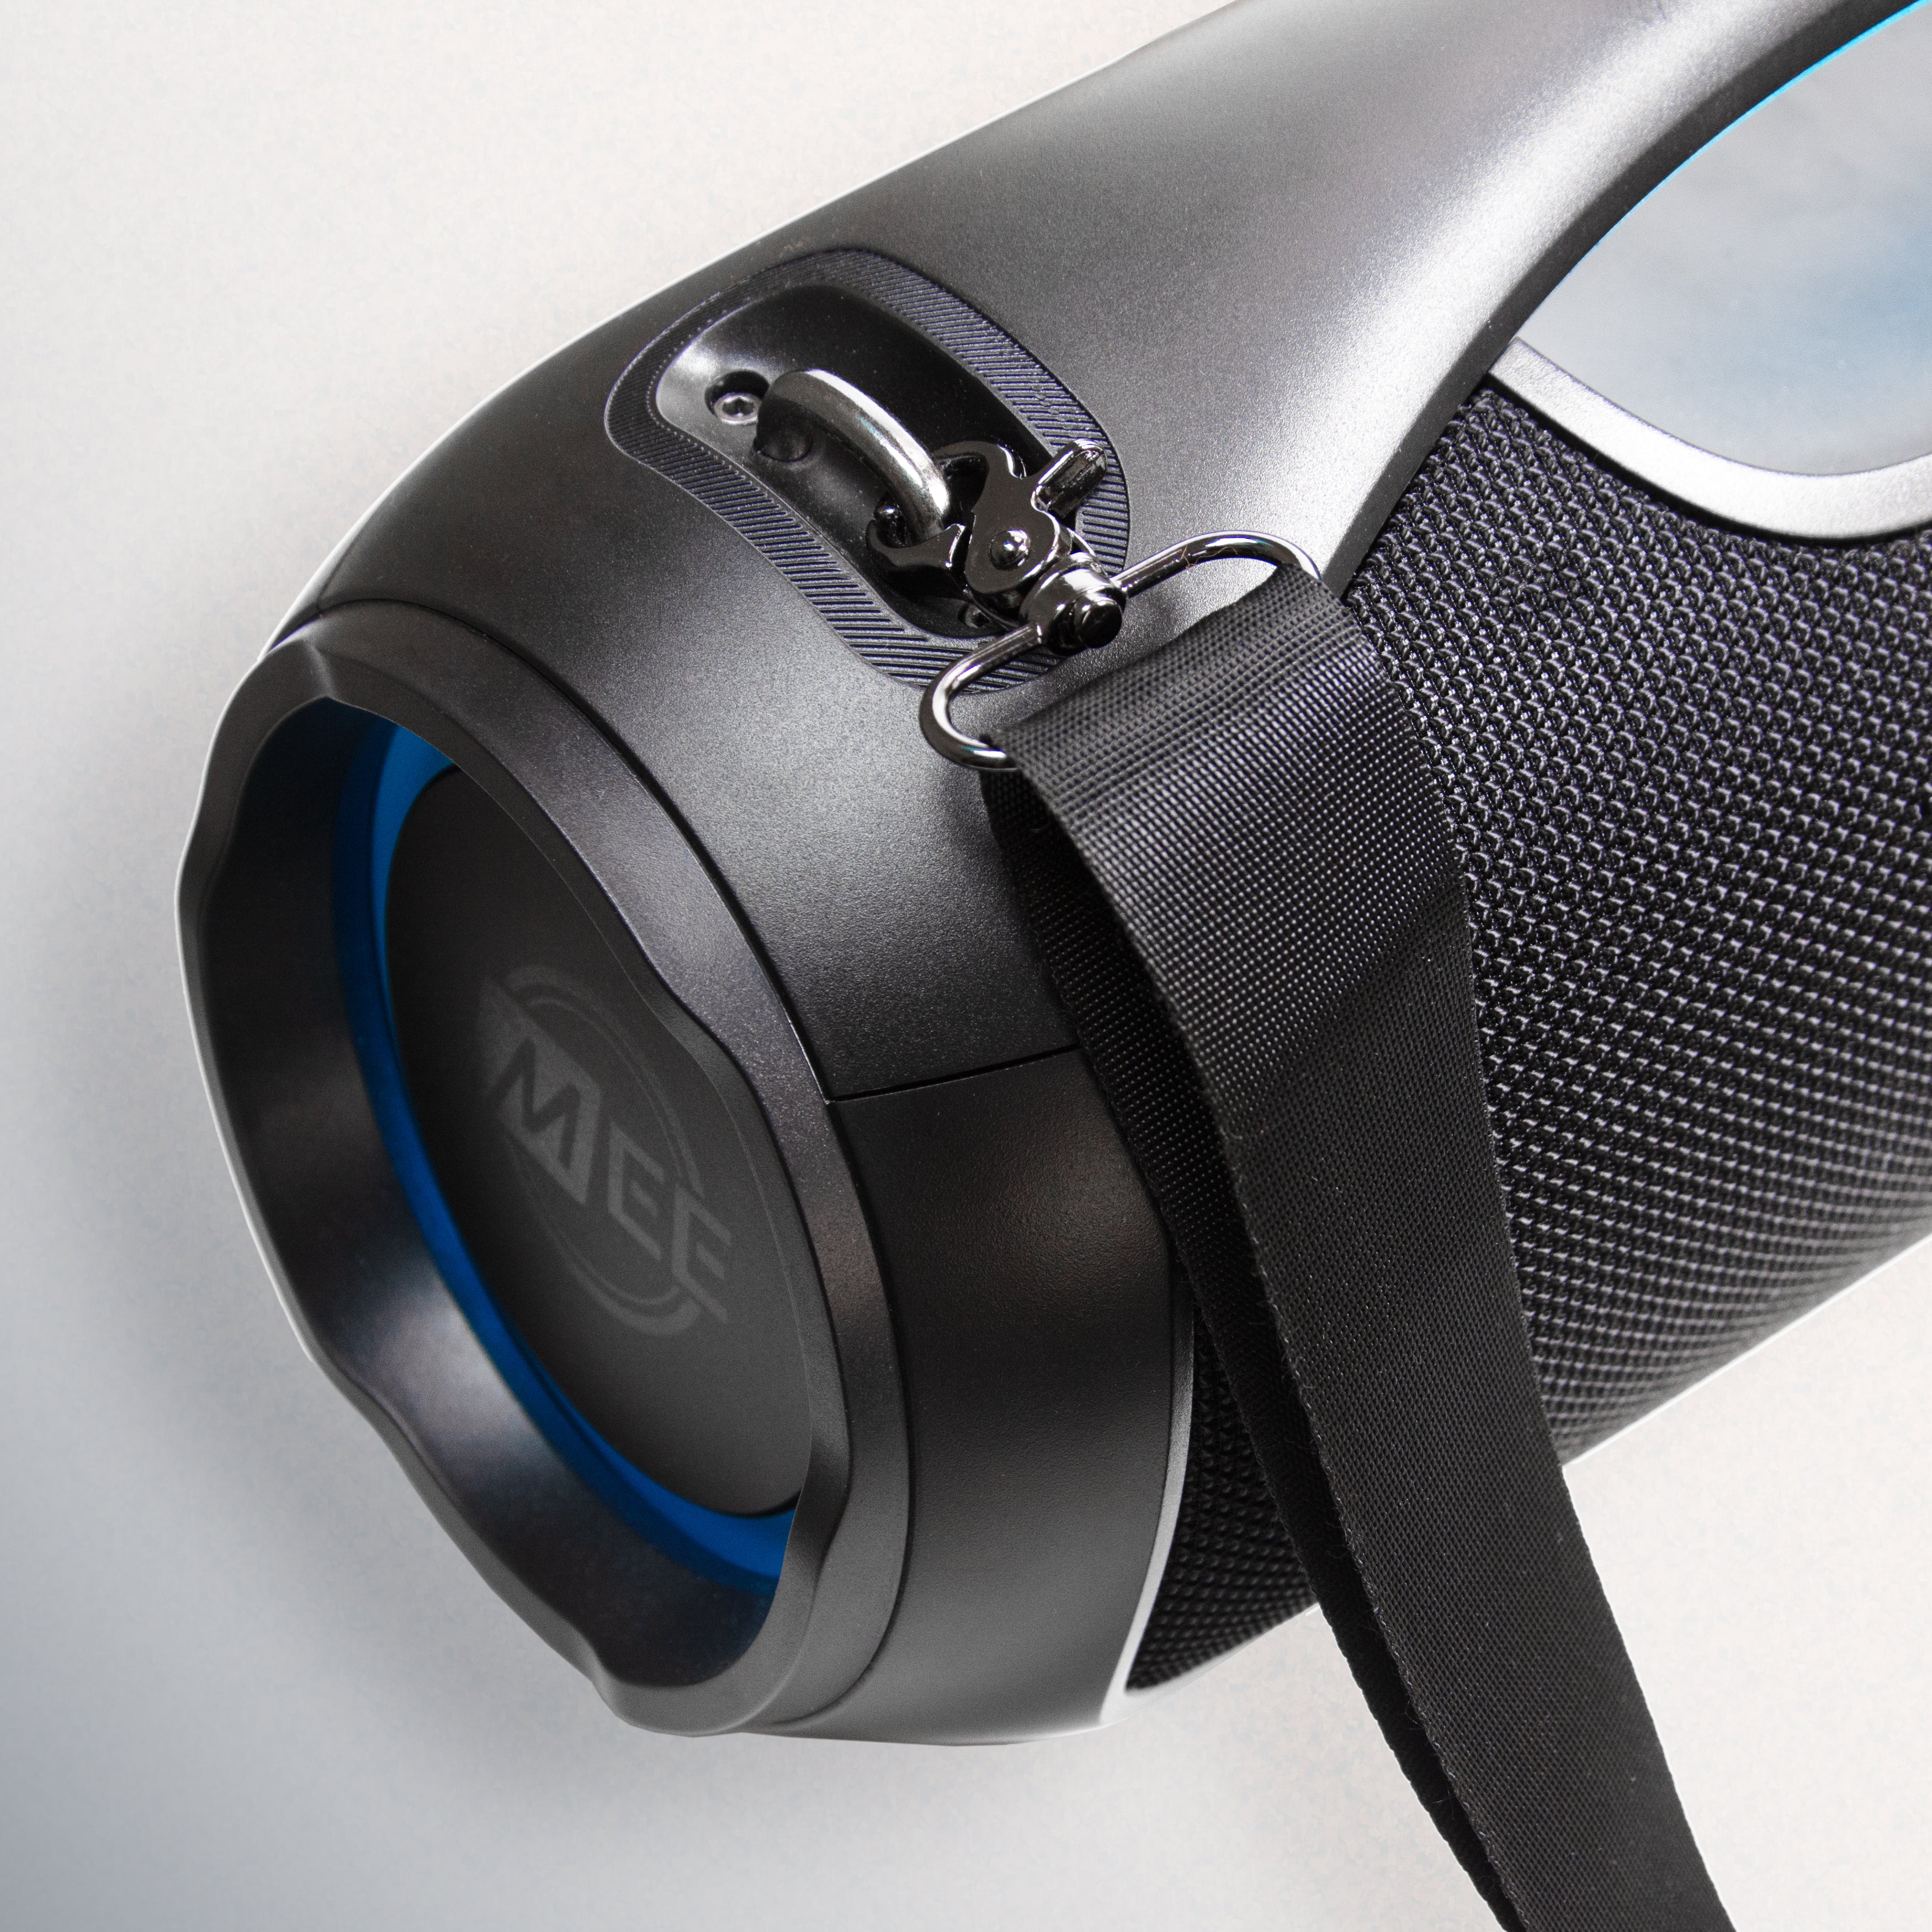 Close-up of a black portable speaker with a fabric strap and a blue accent around the speaker port. the brand name 'meg' is visible on the blue accent.